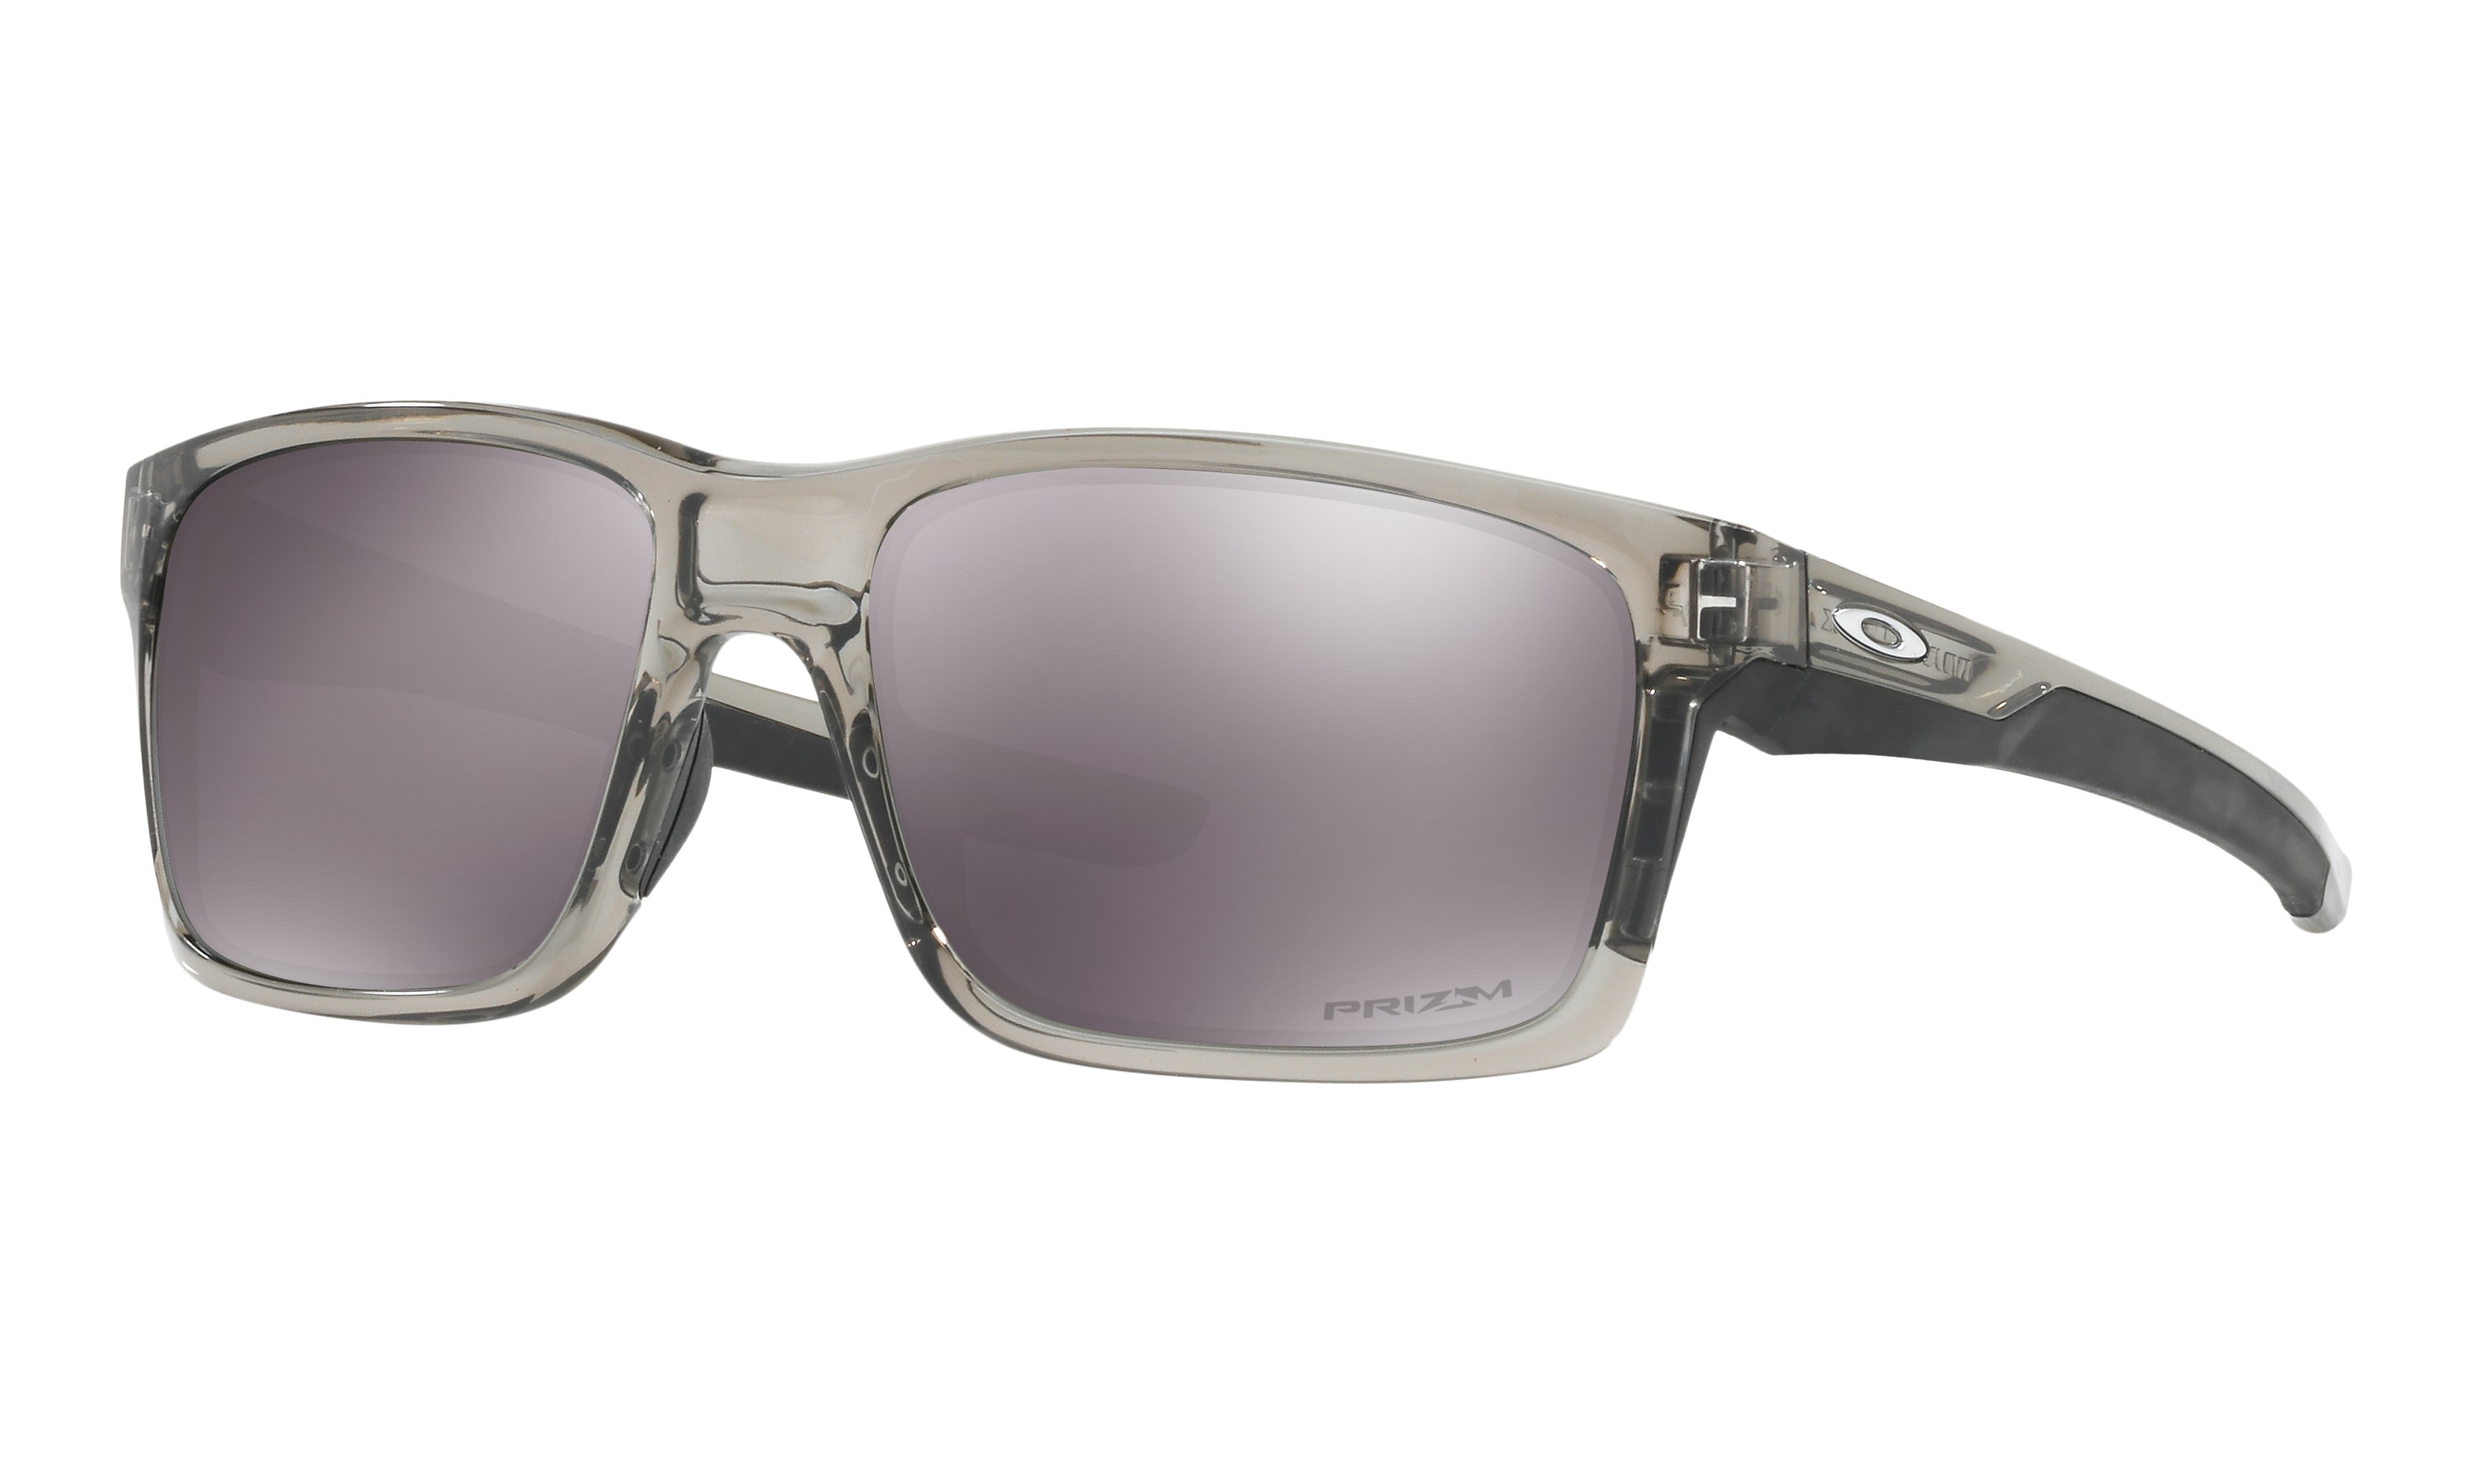 Oakley Sunglasses MAINLINK PRIZM - Tony's Tuxes and Clothier for 